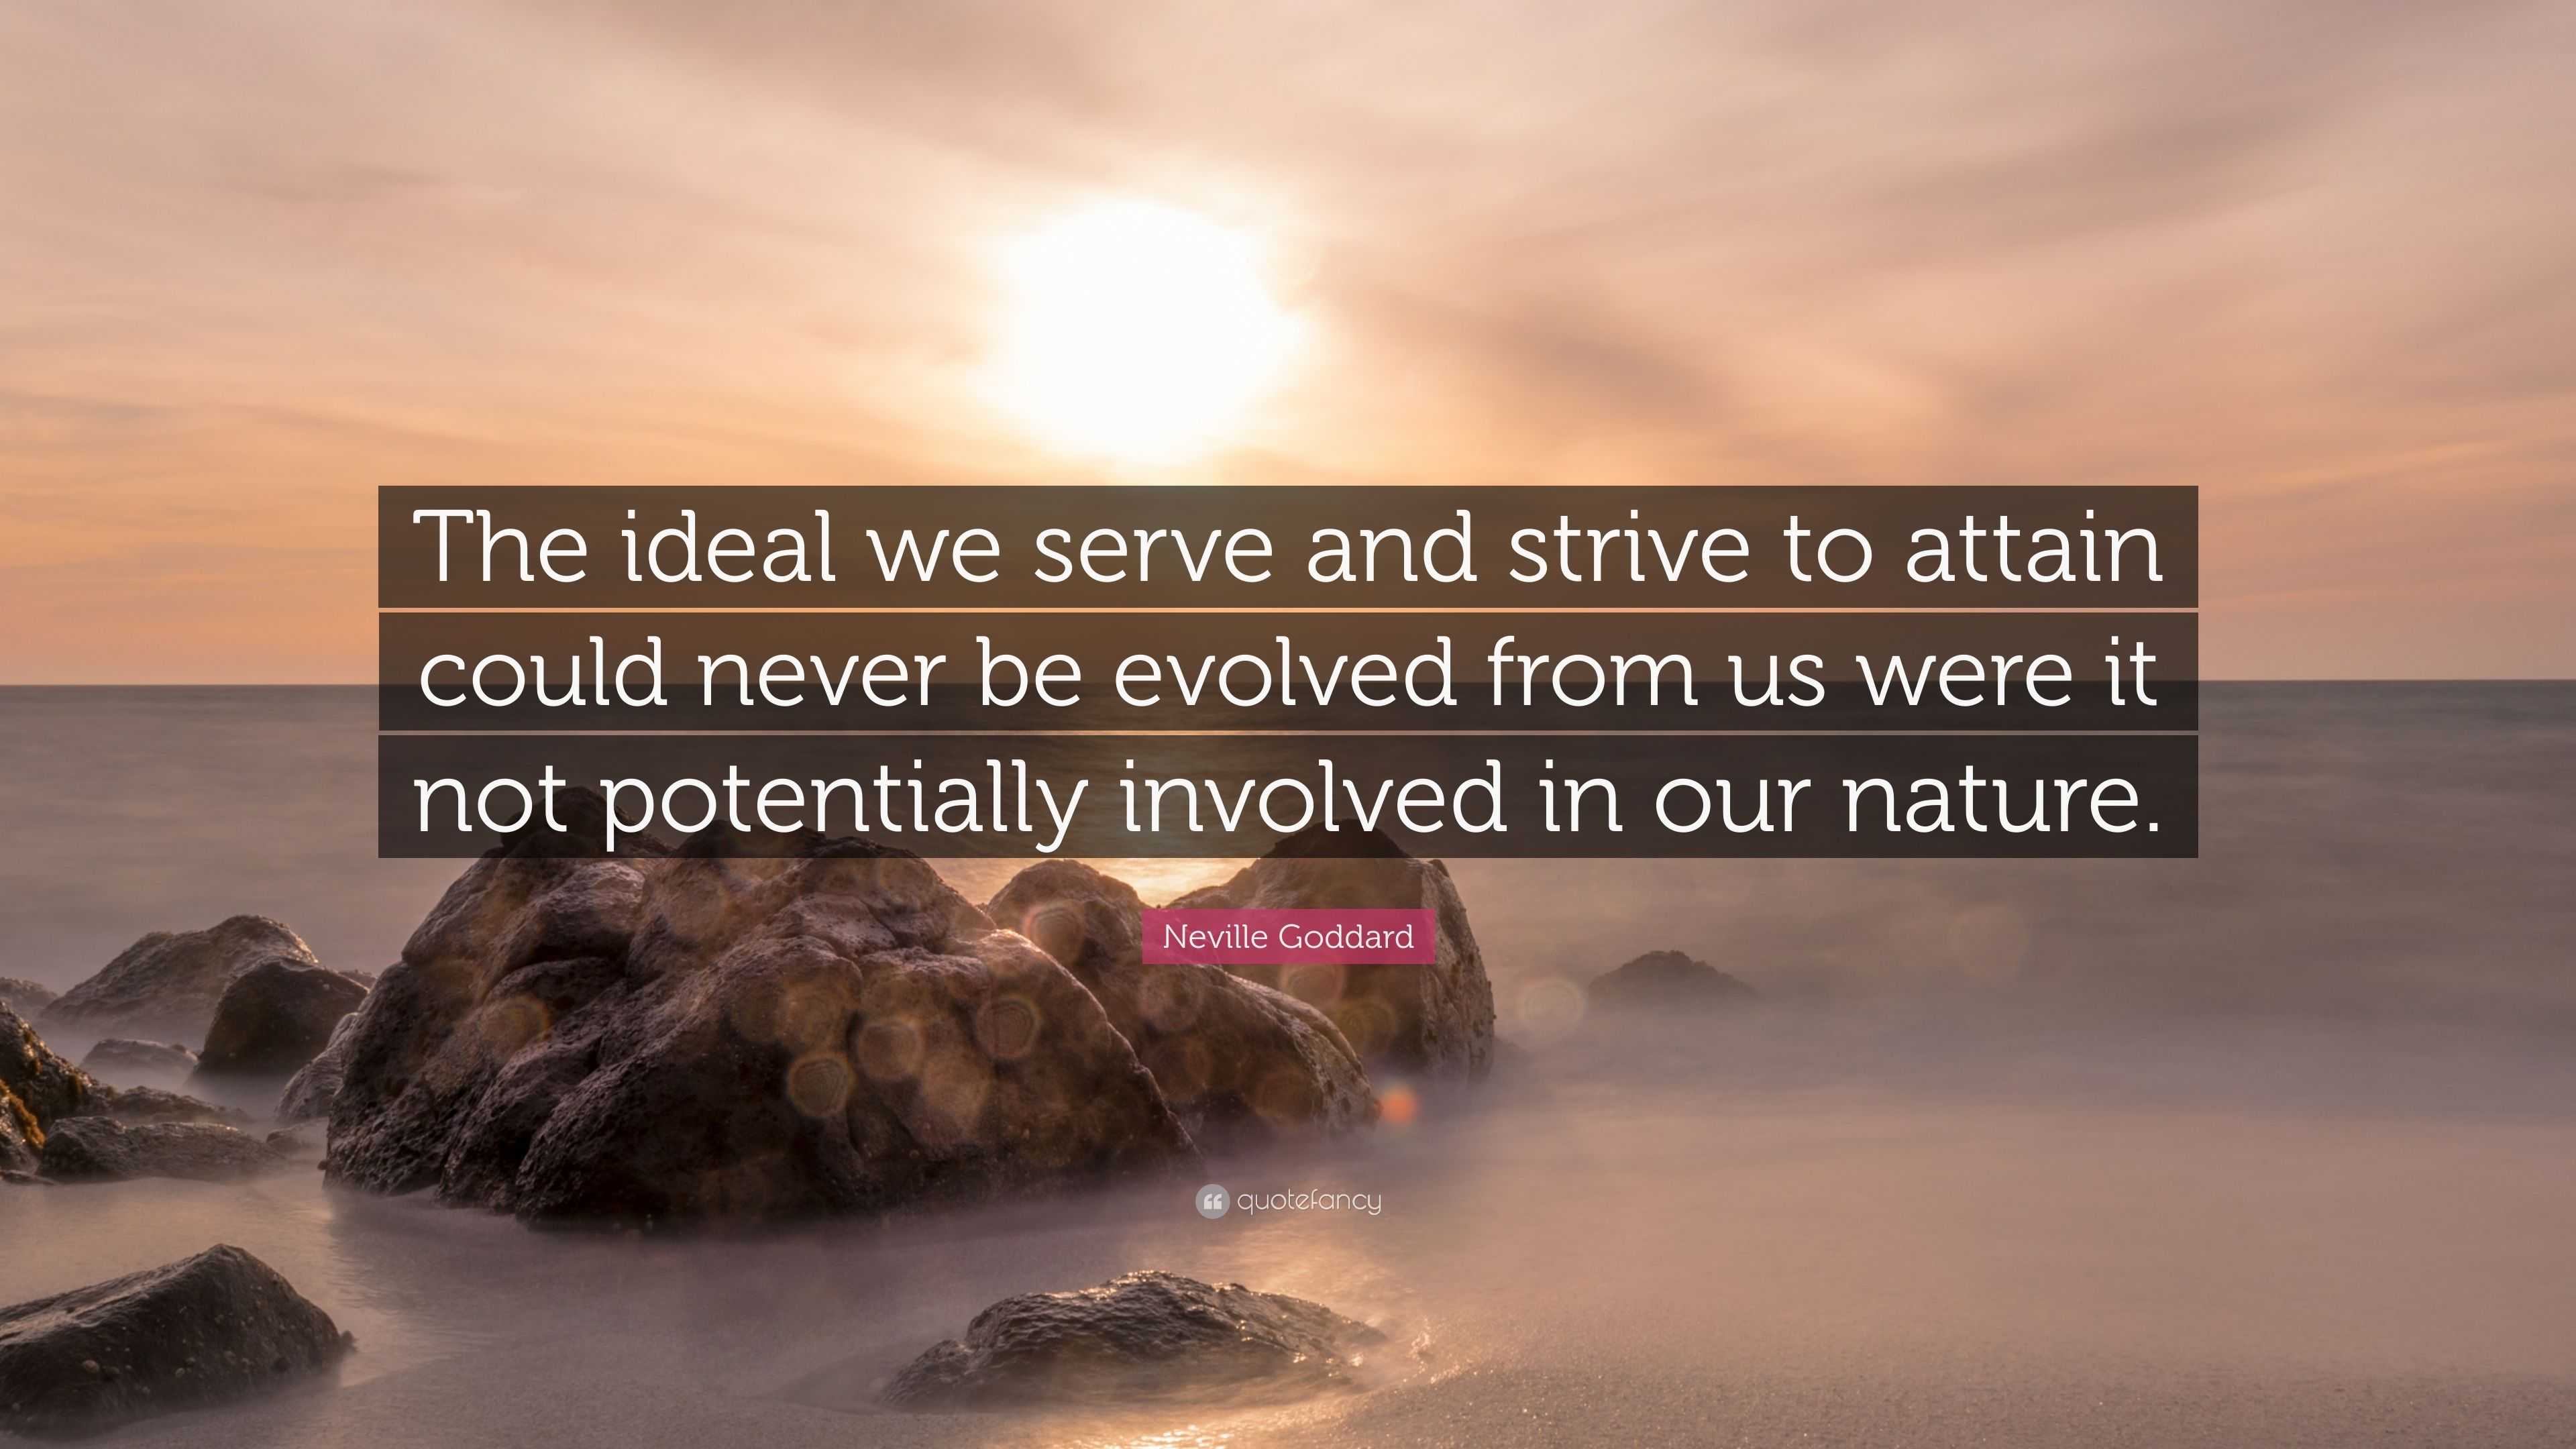 Neville Goddard Quote: “The ideal we serve and strive to attain could ...